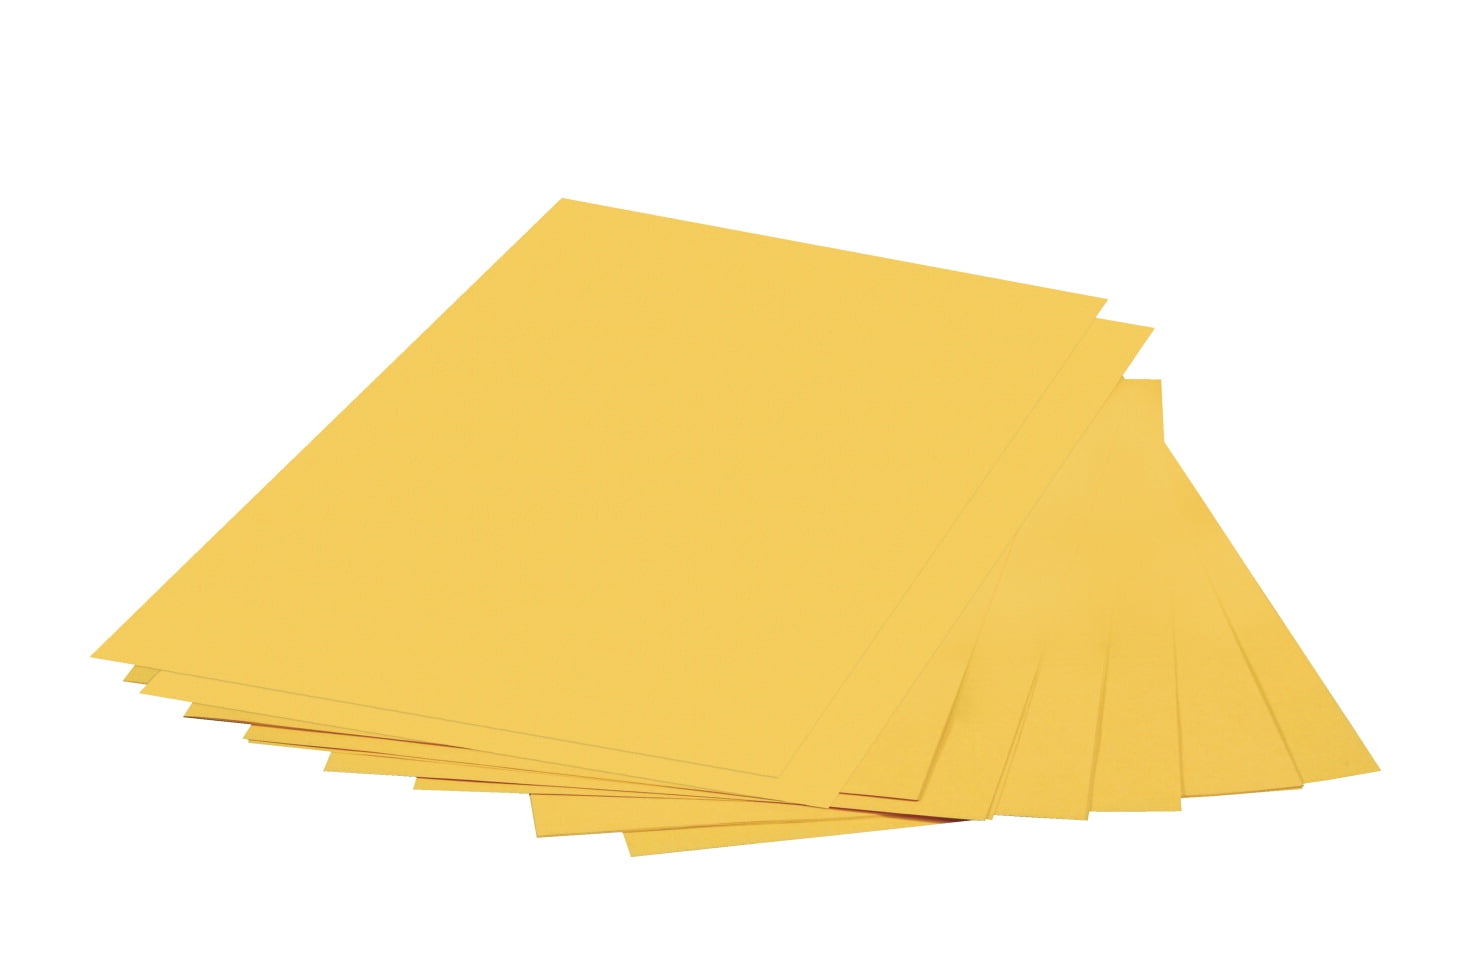 Pastel Colored Copy Paper, 20 lbs., 8.5 x 11, Canary, 500/Ream (14787)